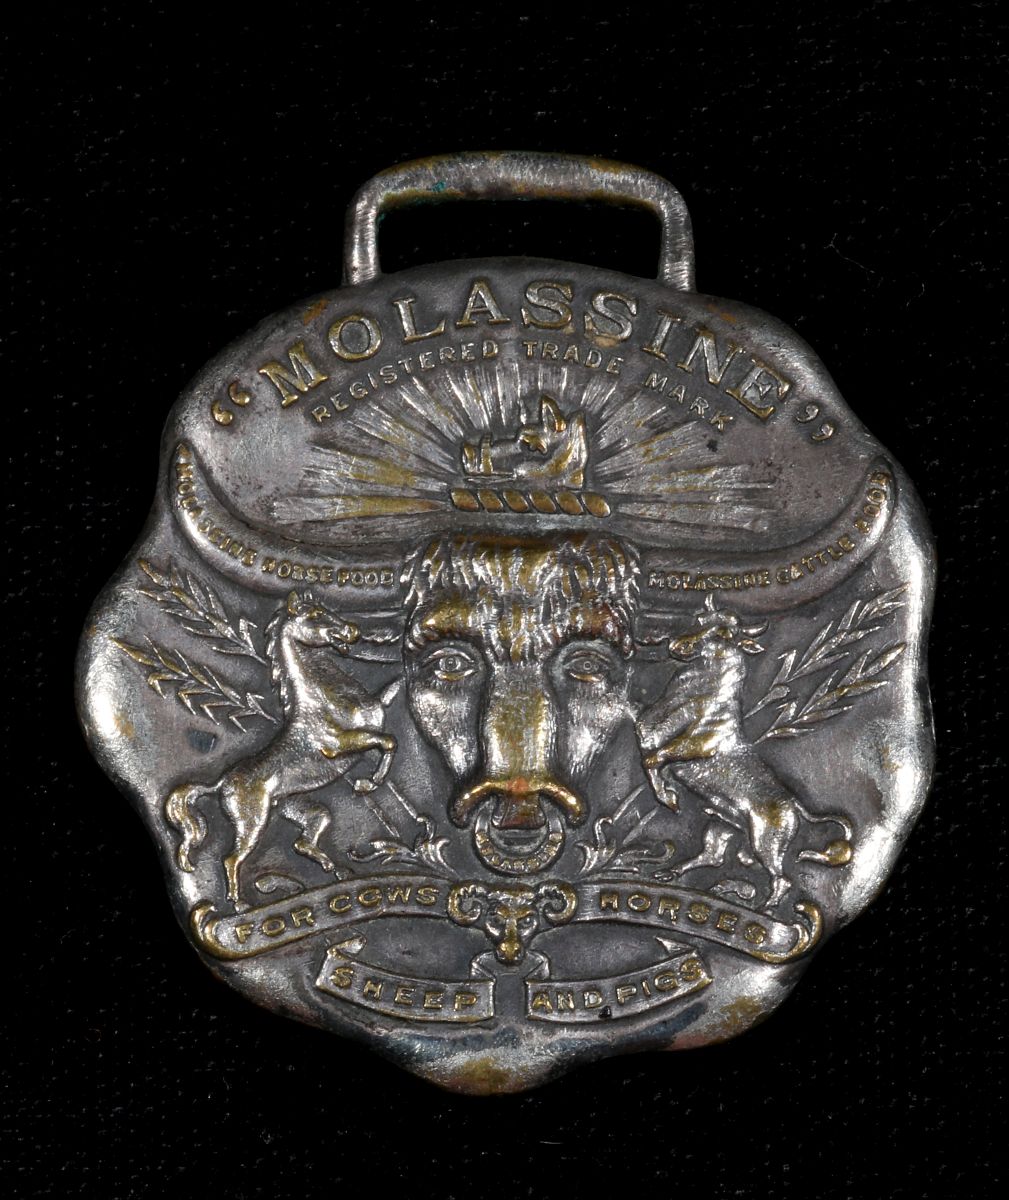 MOLASSINE MEAL ADVERTISING WATCH FOB CIRCA 1900